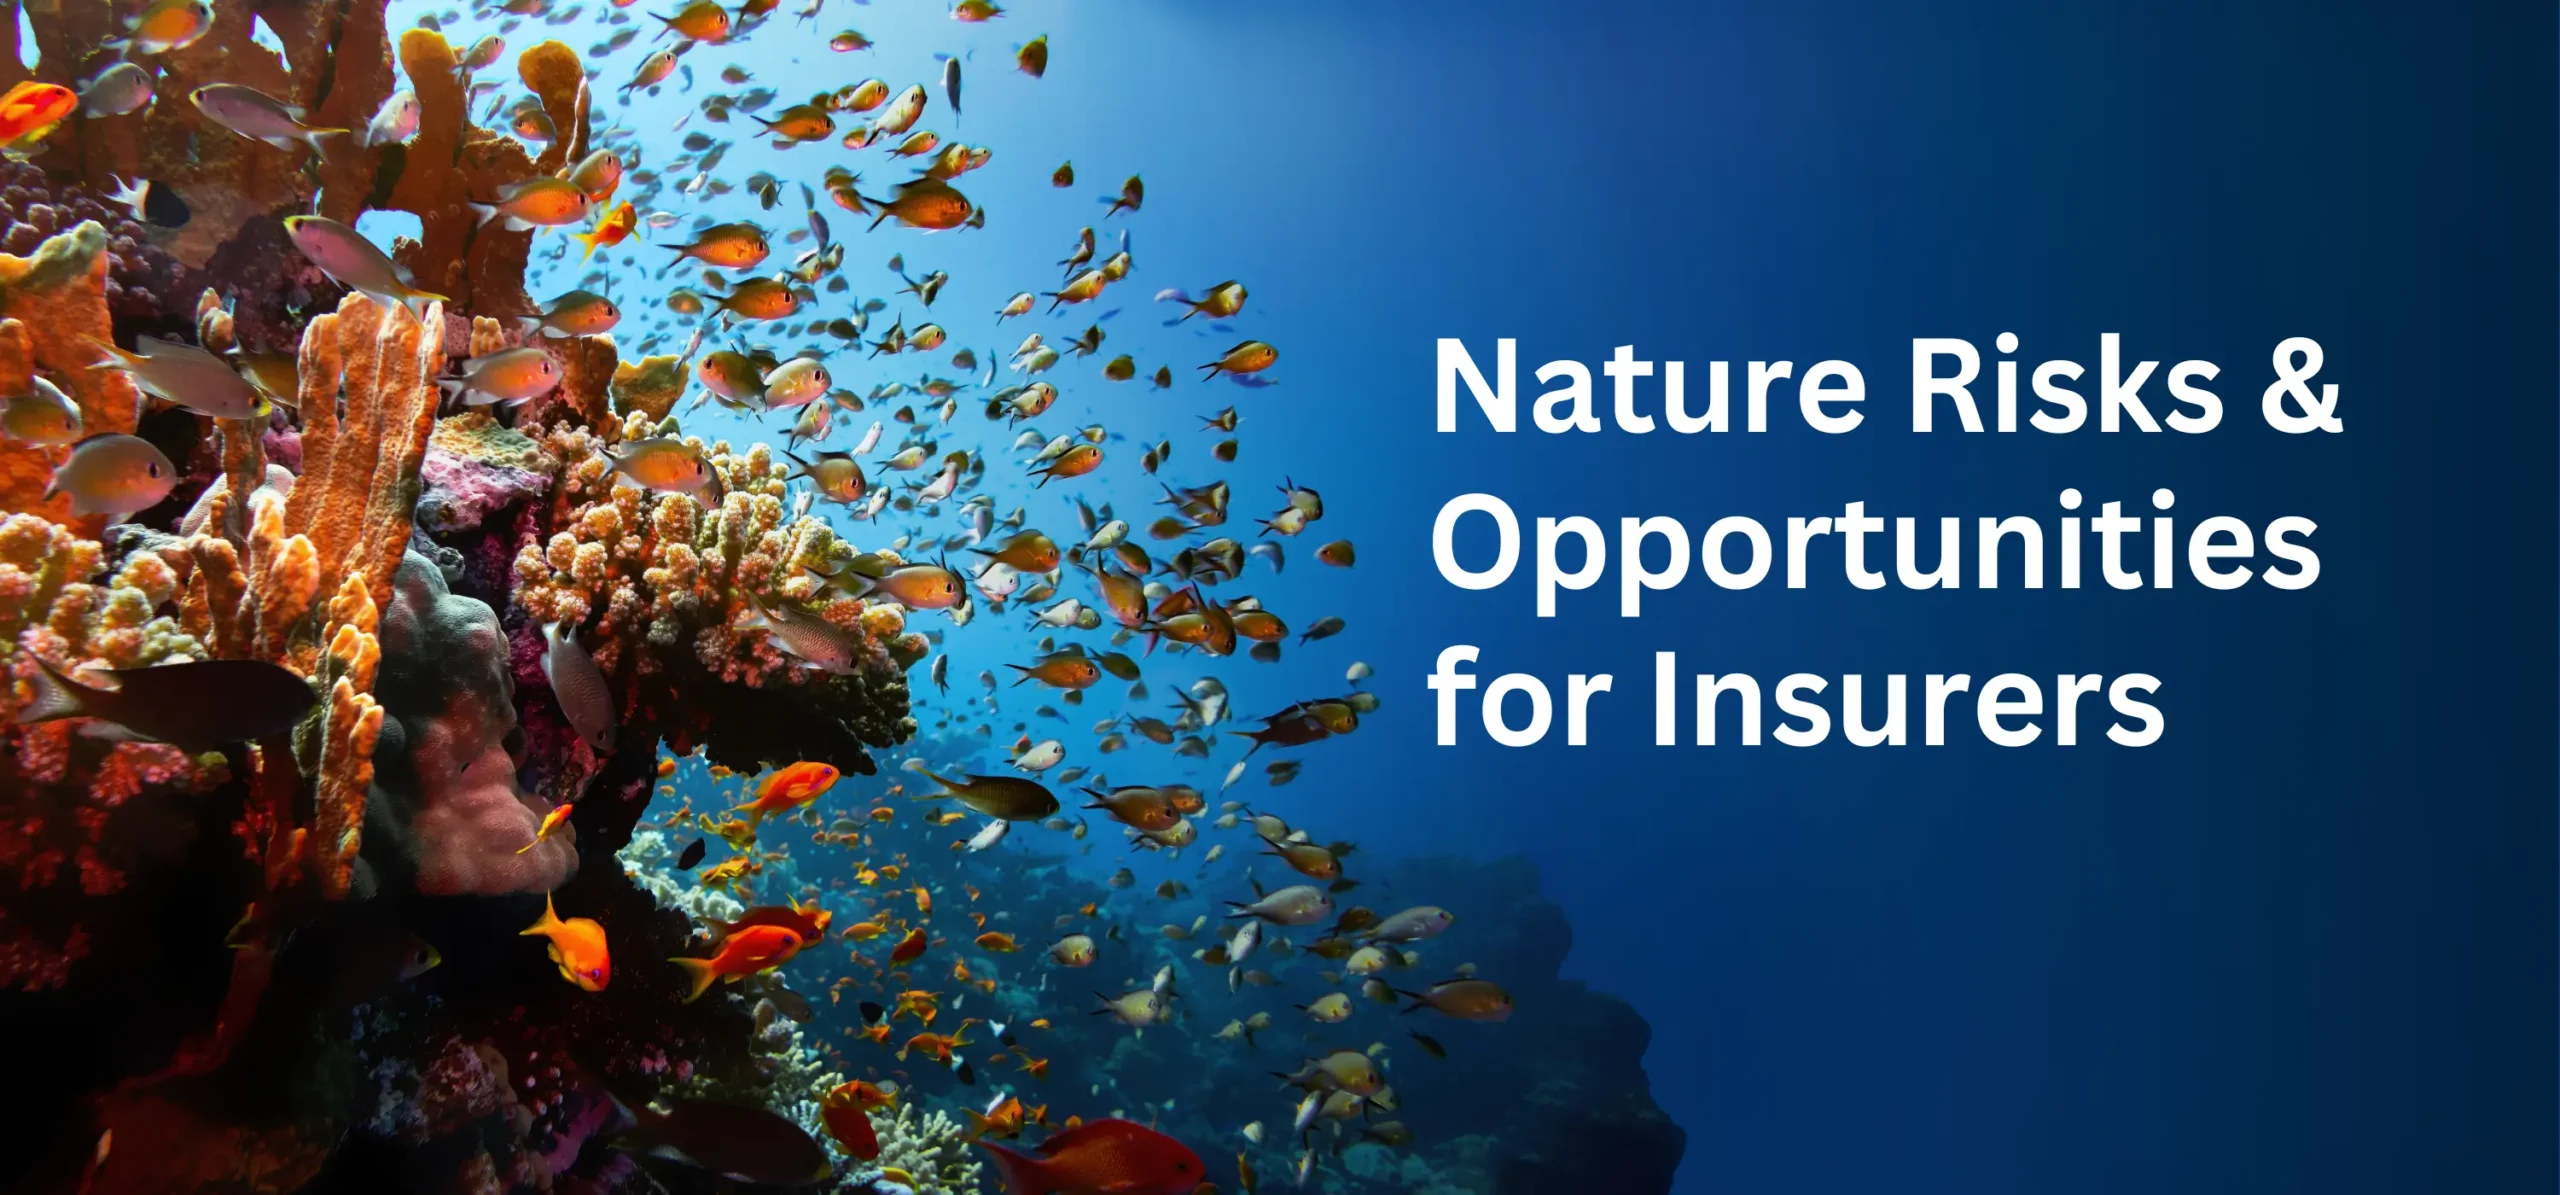 Nature Risks & Opportunities for Insurers